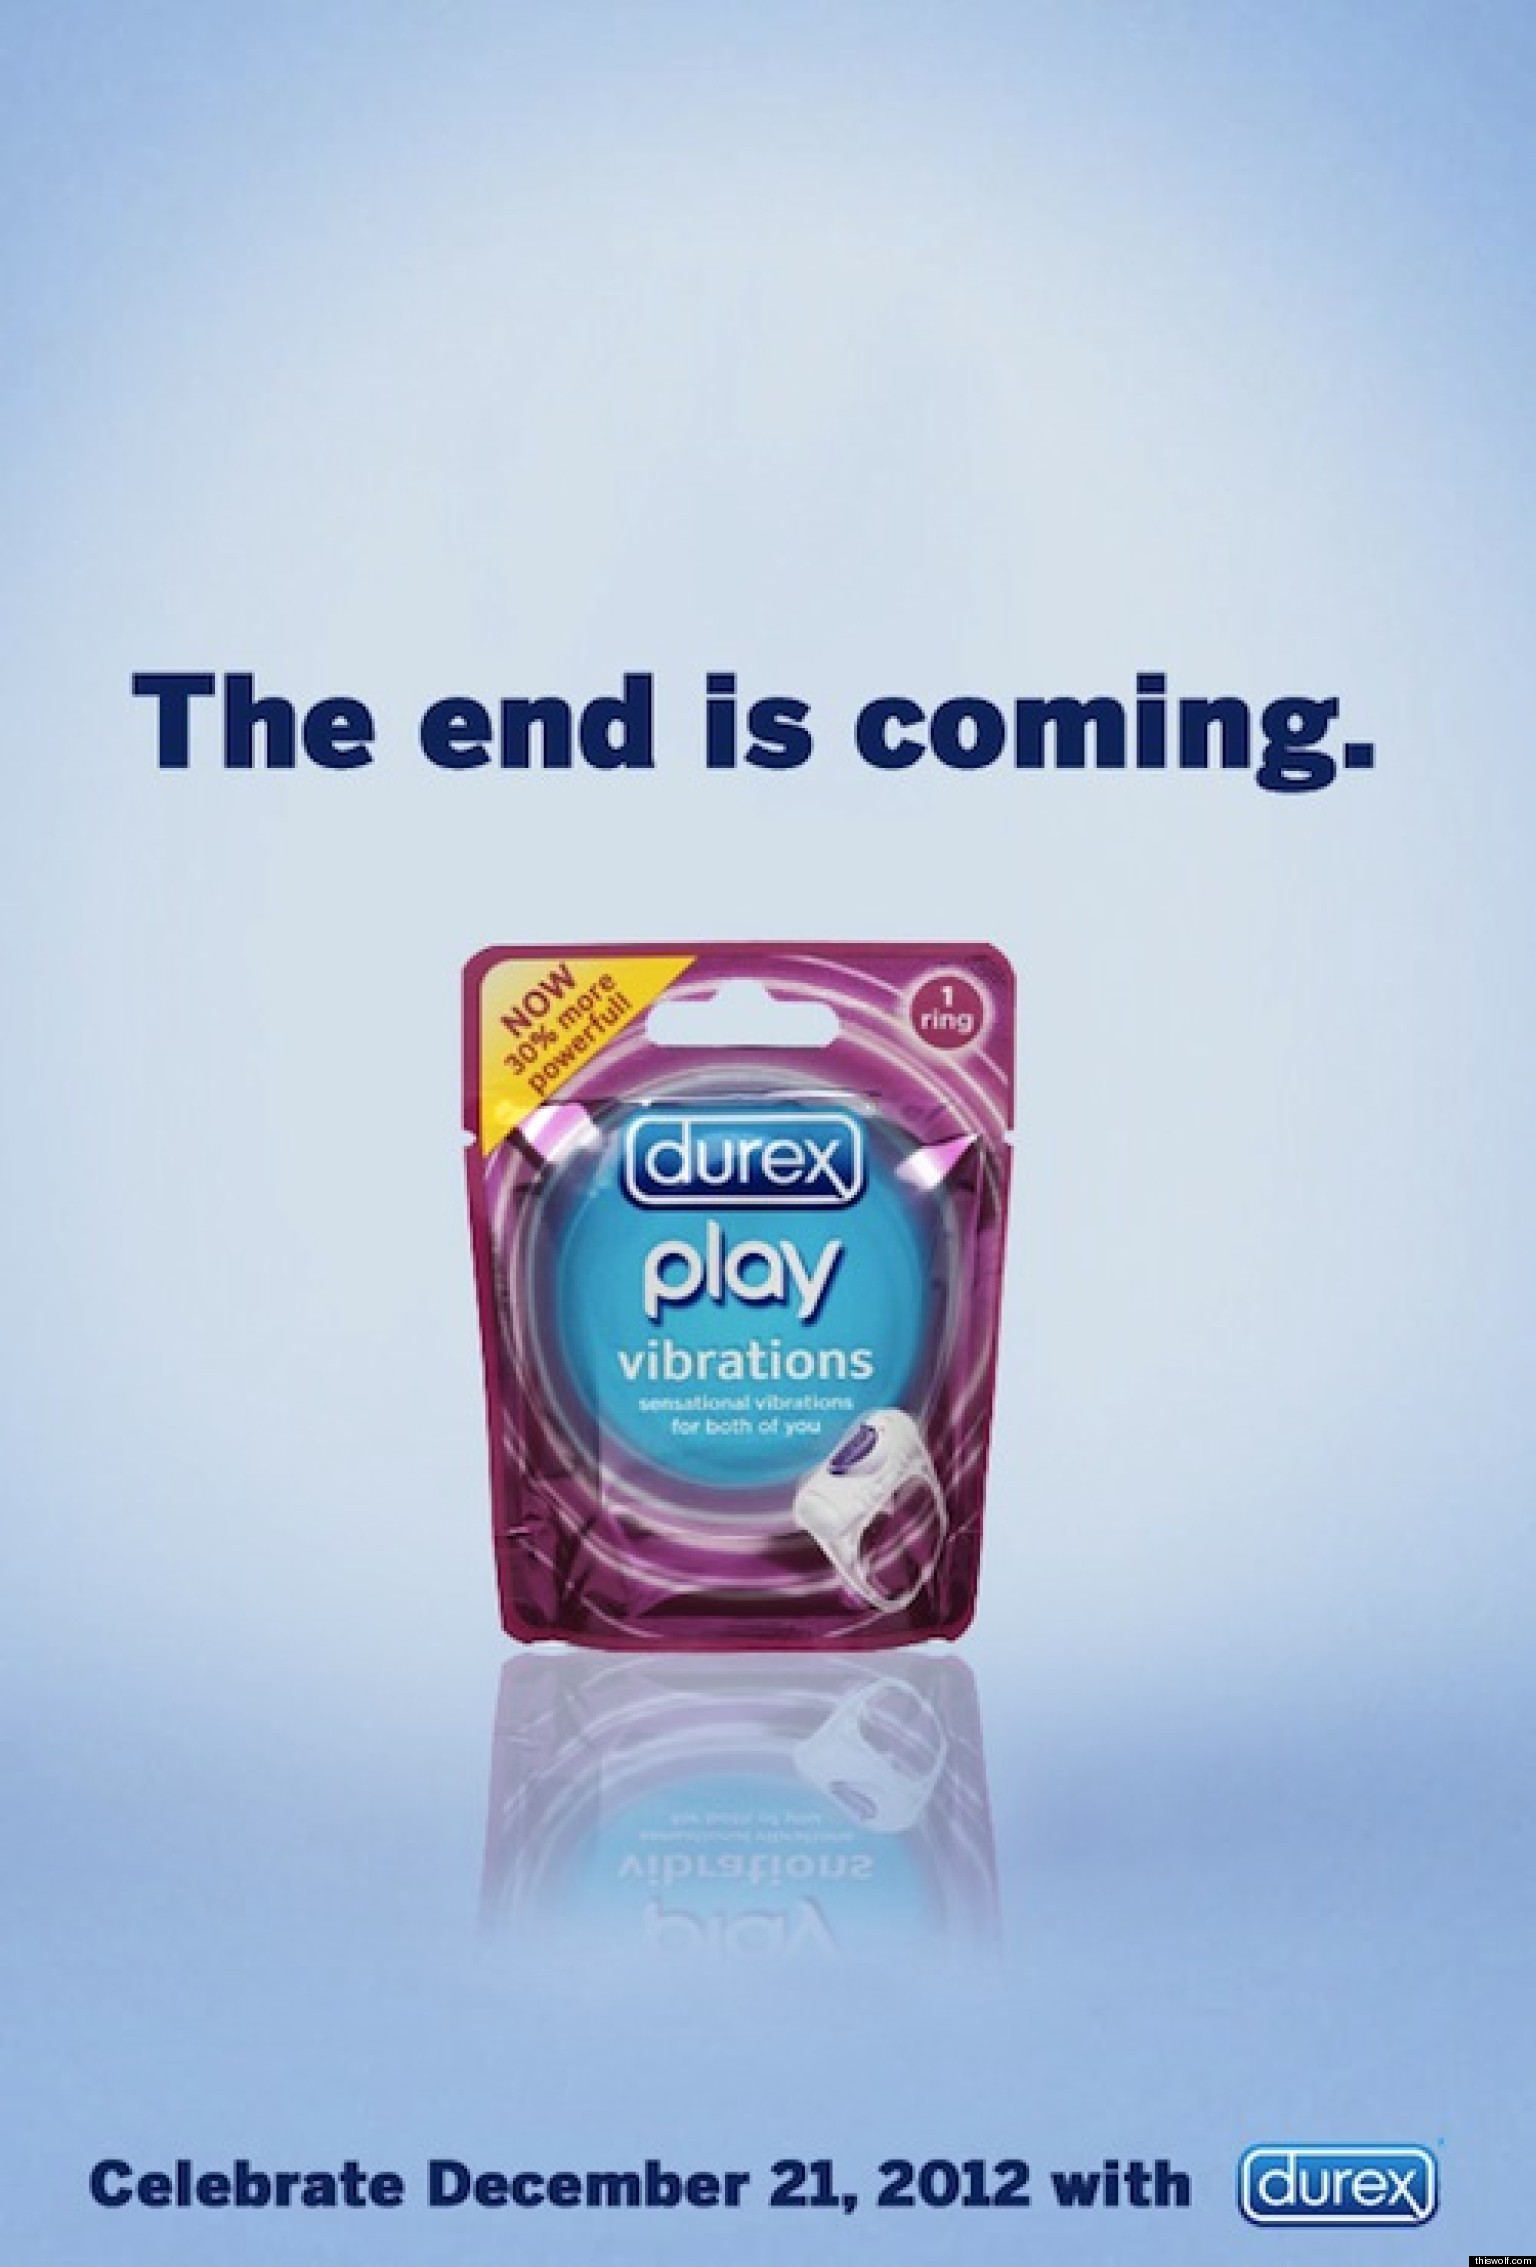 Durex Condoms Celebrates The End Of The World (PHOTO) | HuffPost